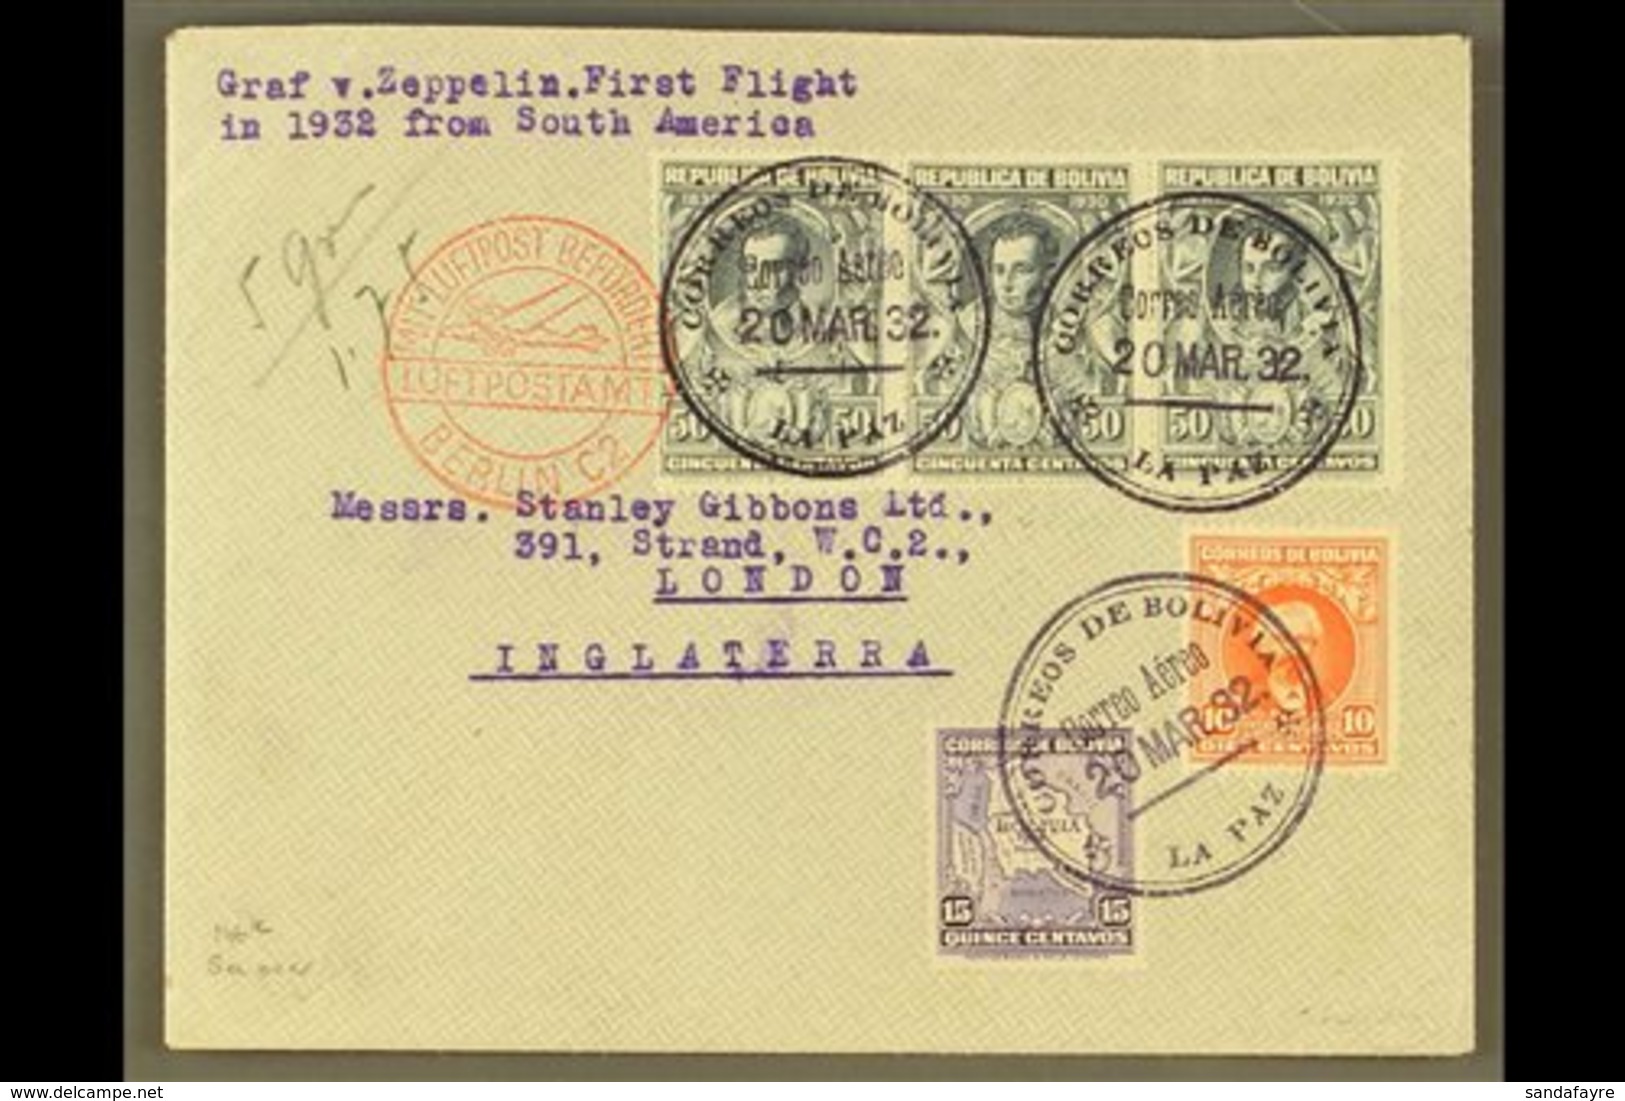 1932 1st SOUTH AMERICA - EUROPE ZEPPELIN FLIGHT, Cover To UK Franked Selection Of Bolivian Stamps Tied By La Paz Cds Can - Bolivië